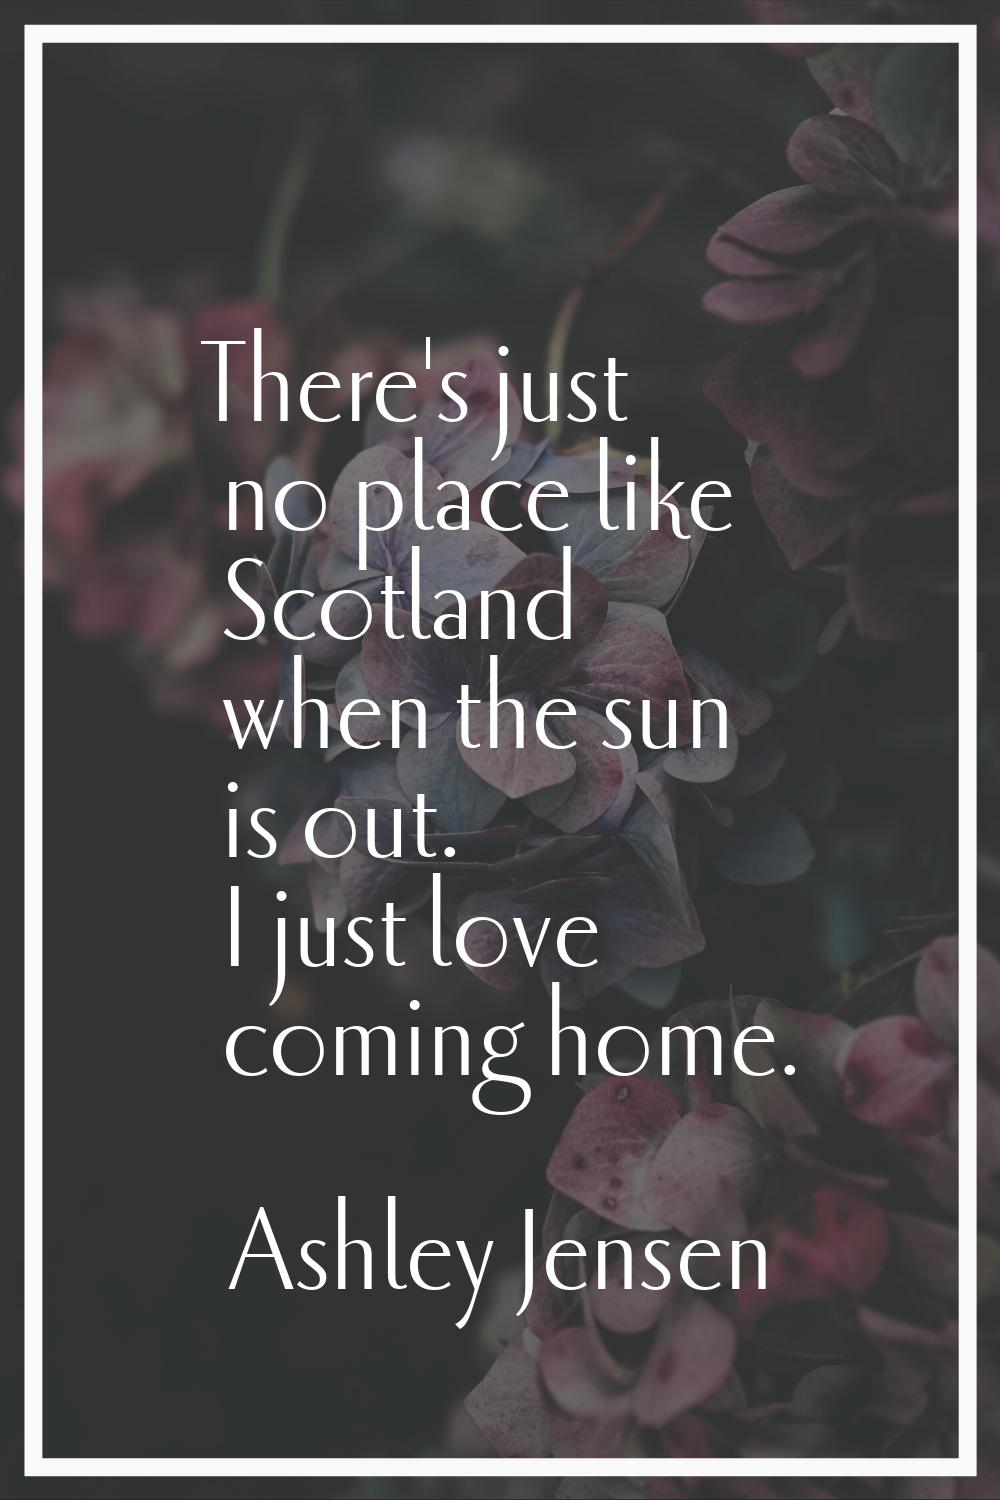 There's just no place like Scotland when the sun is out. I just love coming home.